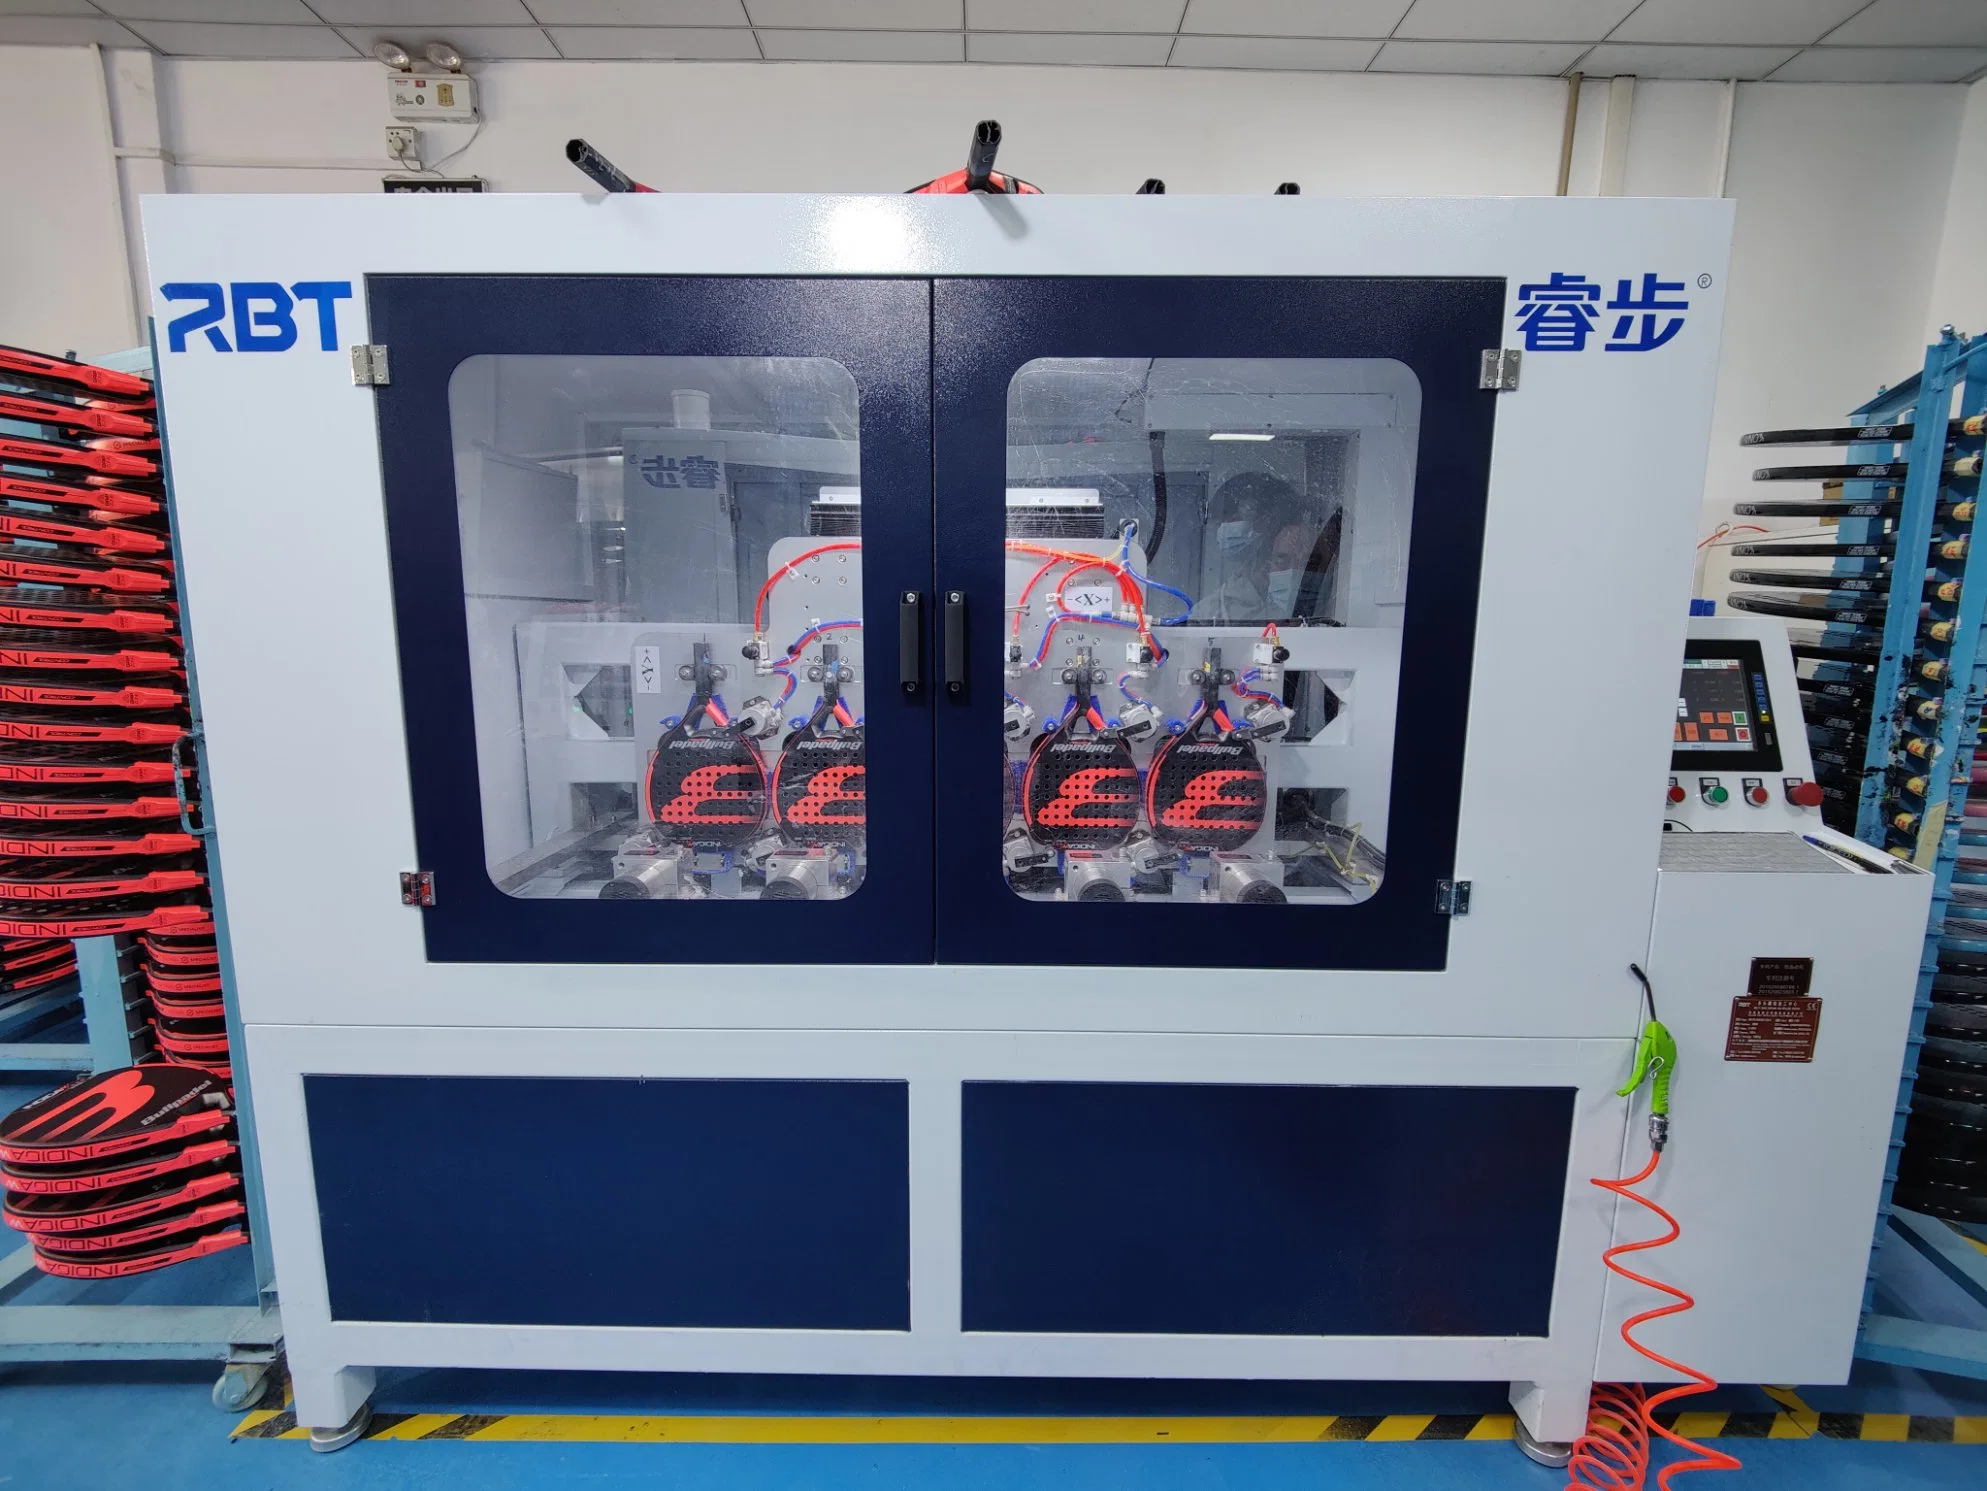 Rbt Beach and Padel Racket CNC Machine Tools for Composite Based Sports Goods Manufacturer